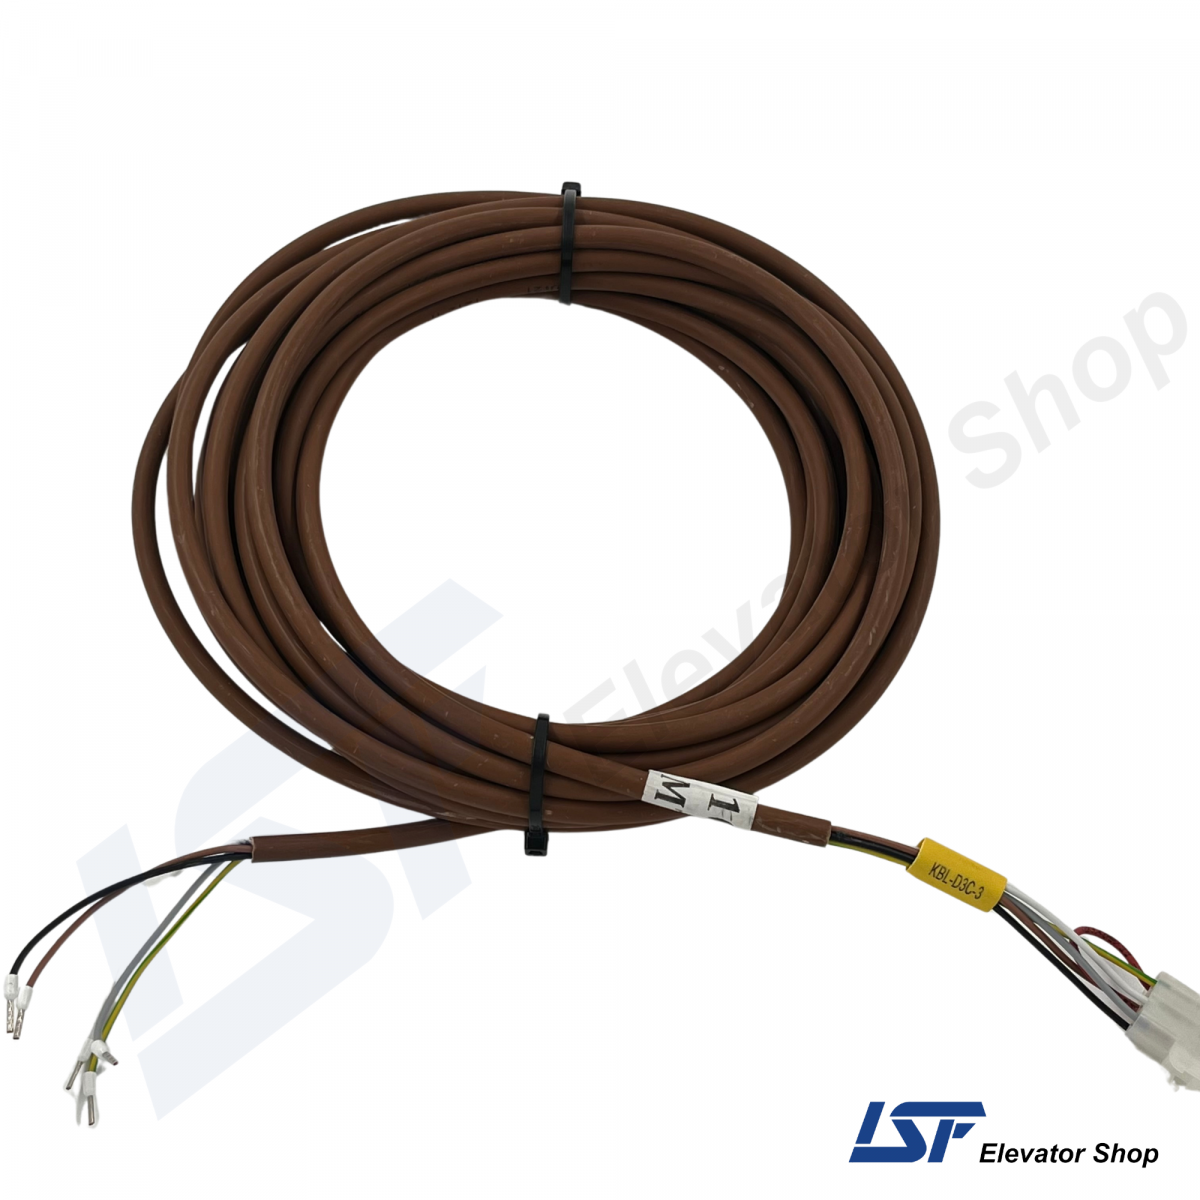 a brown cable with wires bei Arkel (KBL-D3C-3-Arkel-Door-Contacts-Cable-10m.-for-Elevator-Systems)